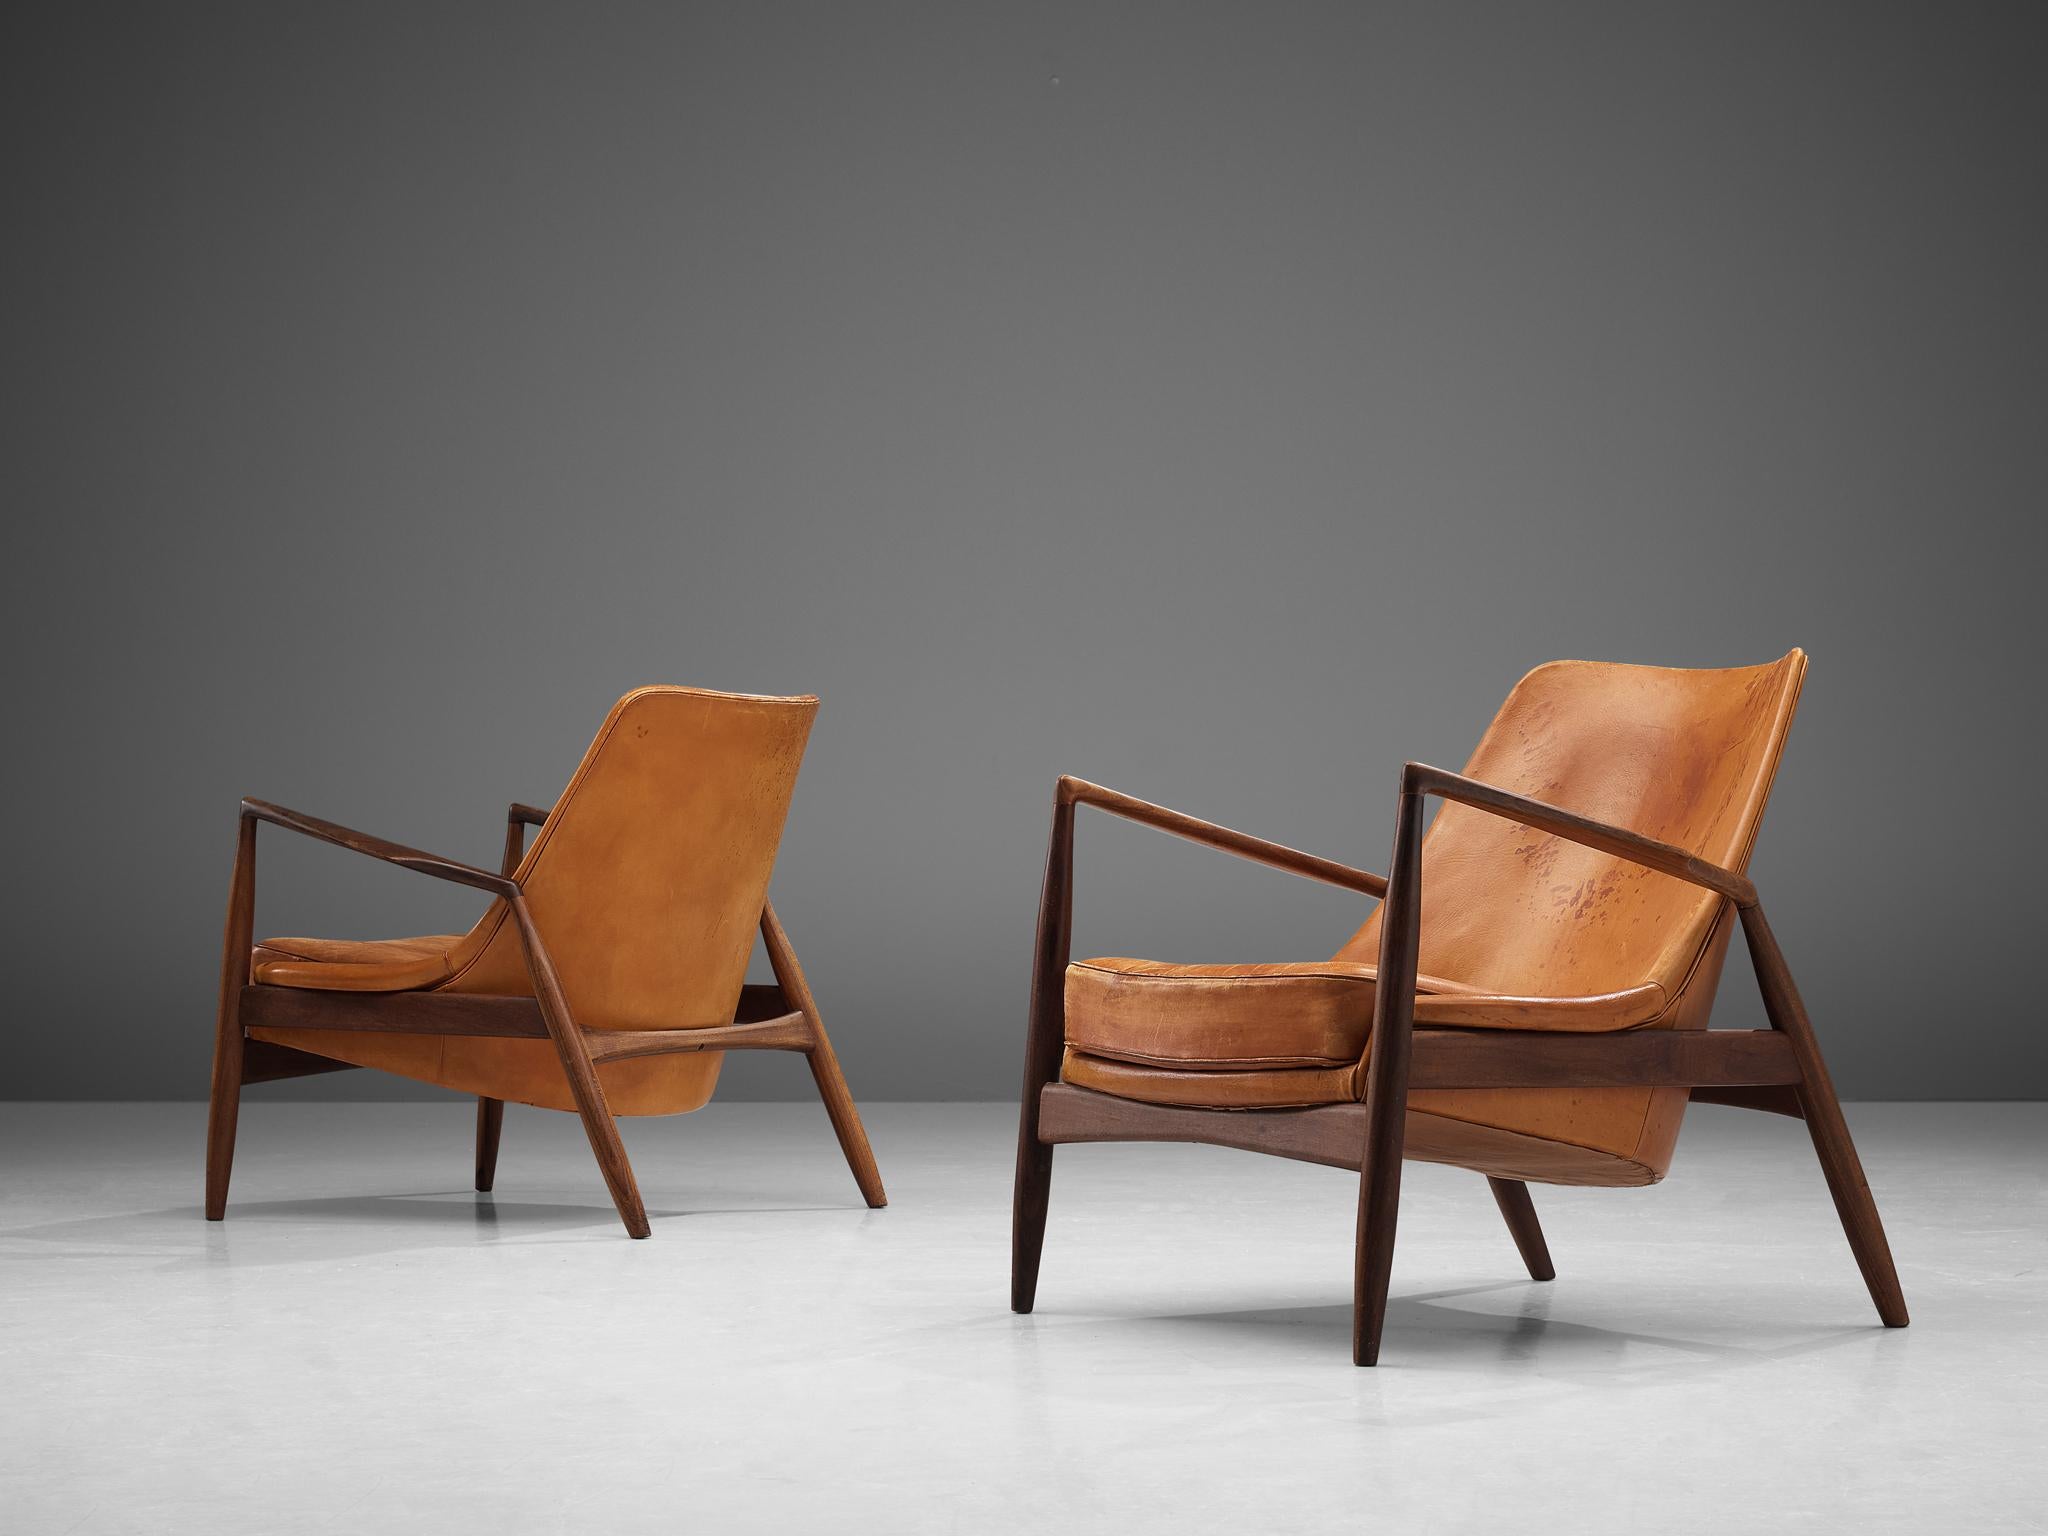 Ib Kofod-Larsen for OPE Mobler, restored pair of 'Sälen' (Seal) lounge chairs model 503-799, teak and leather, Sweden, 1956

Iconic 'Sälen' (seal) lounge chairs by Danish designer Ib Kofod-Larsen. The well-crafted frame of these chairs is made out